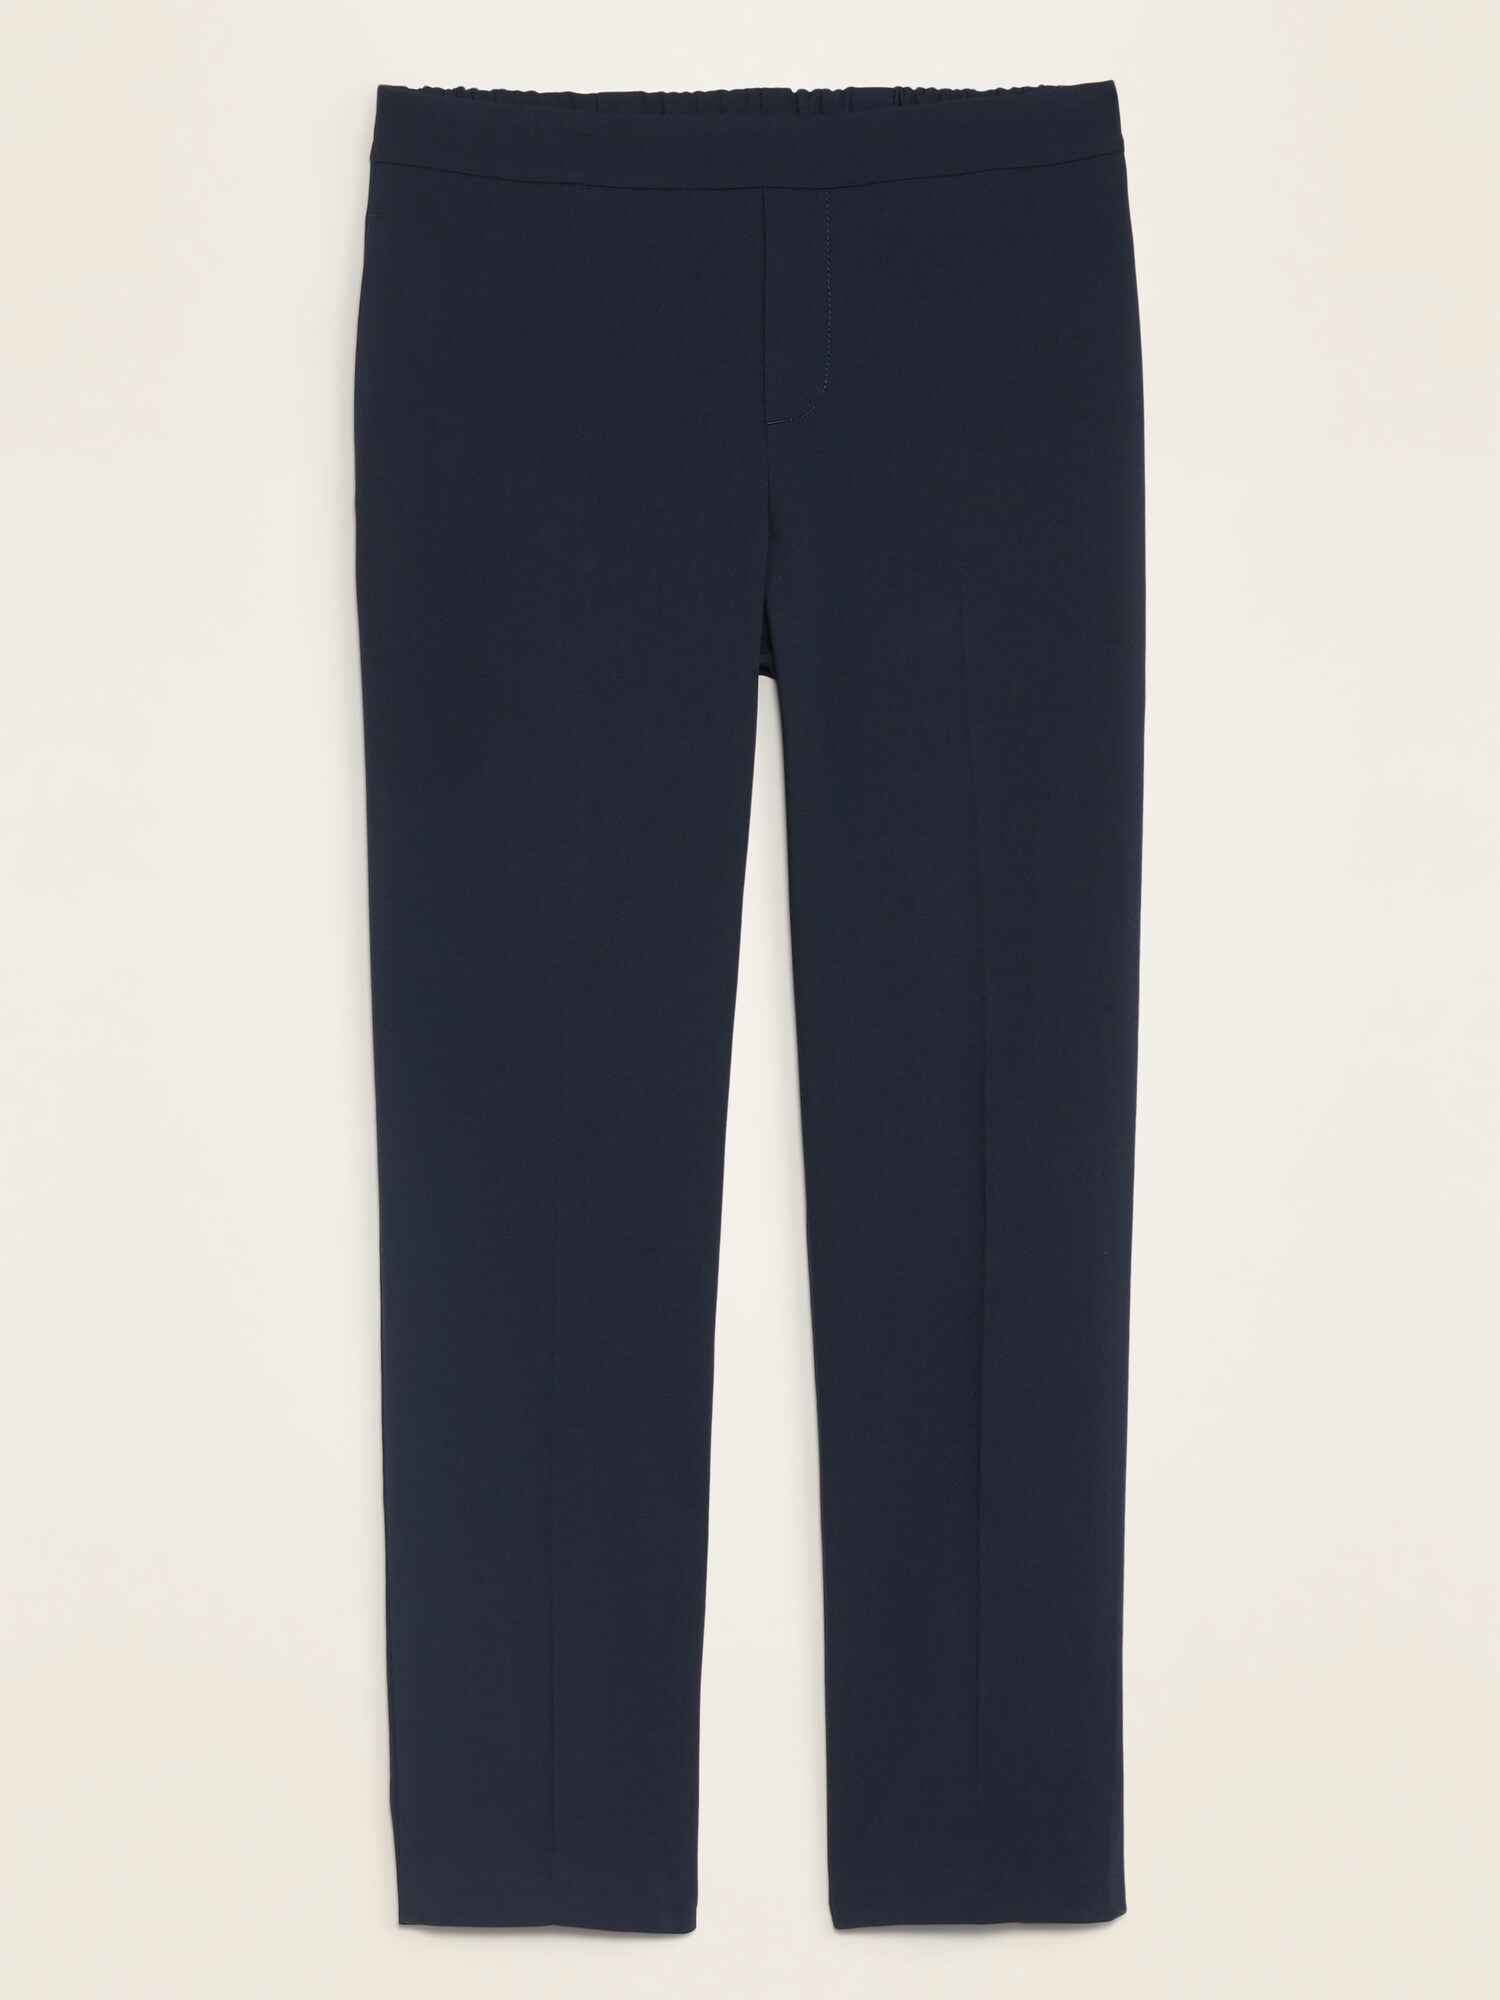 Navy Blue Ankle Pants  Women's Pull On Ankle Pants